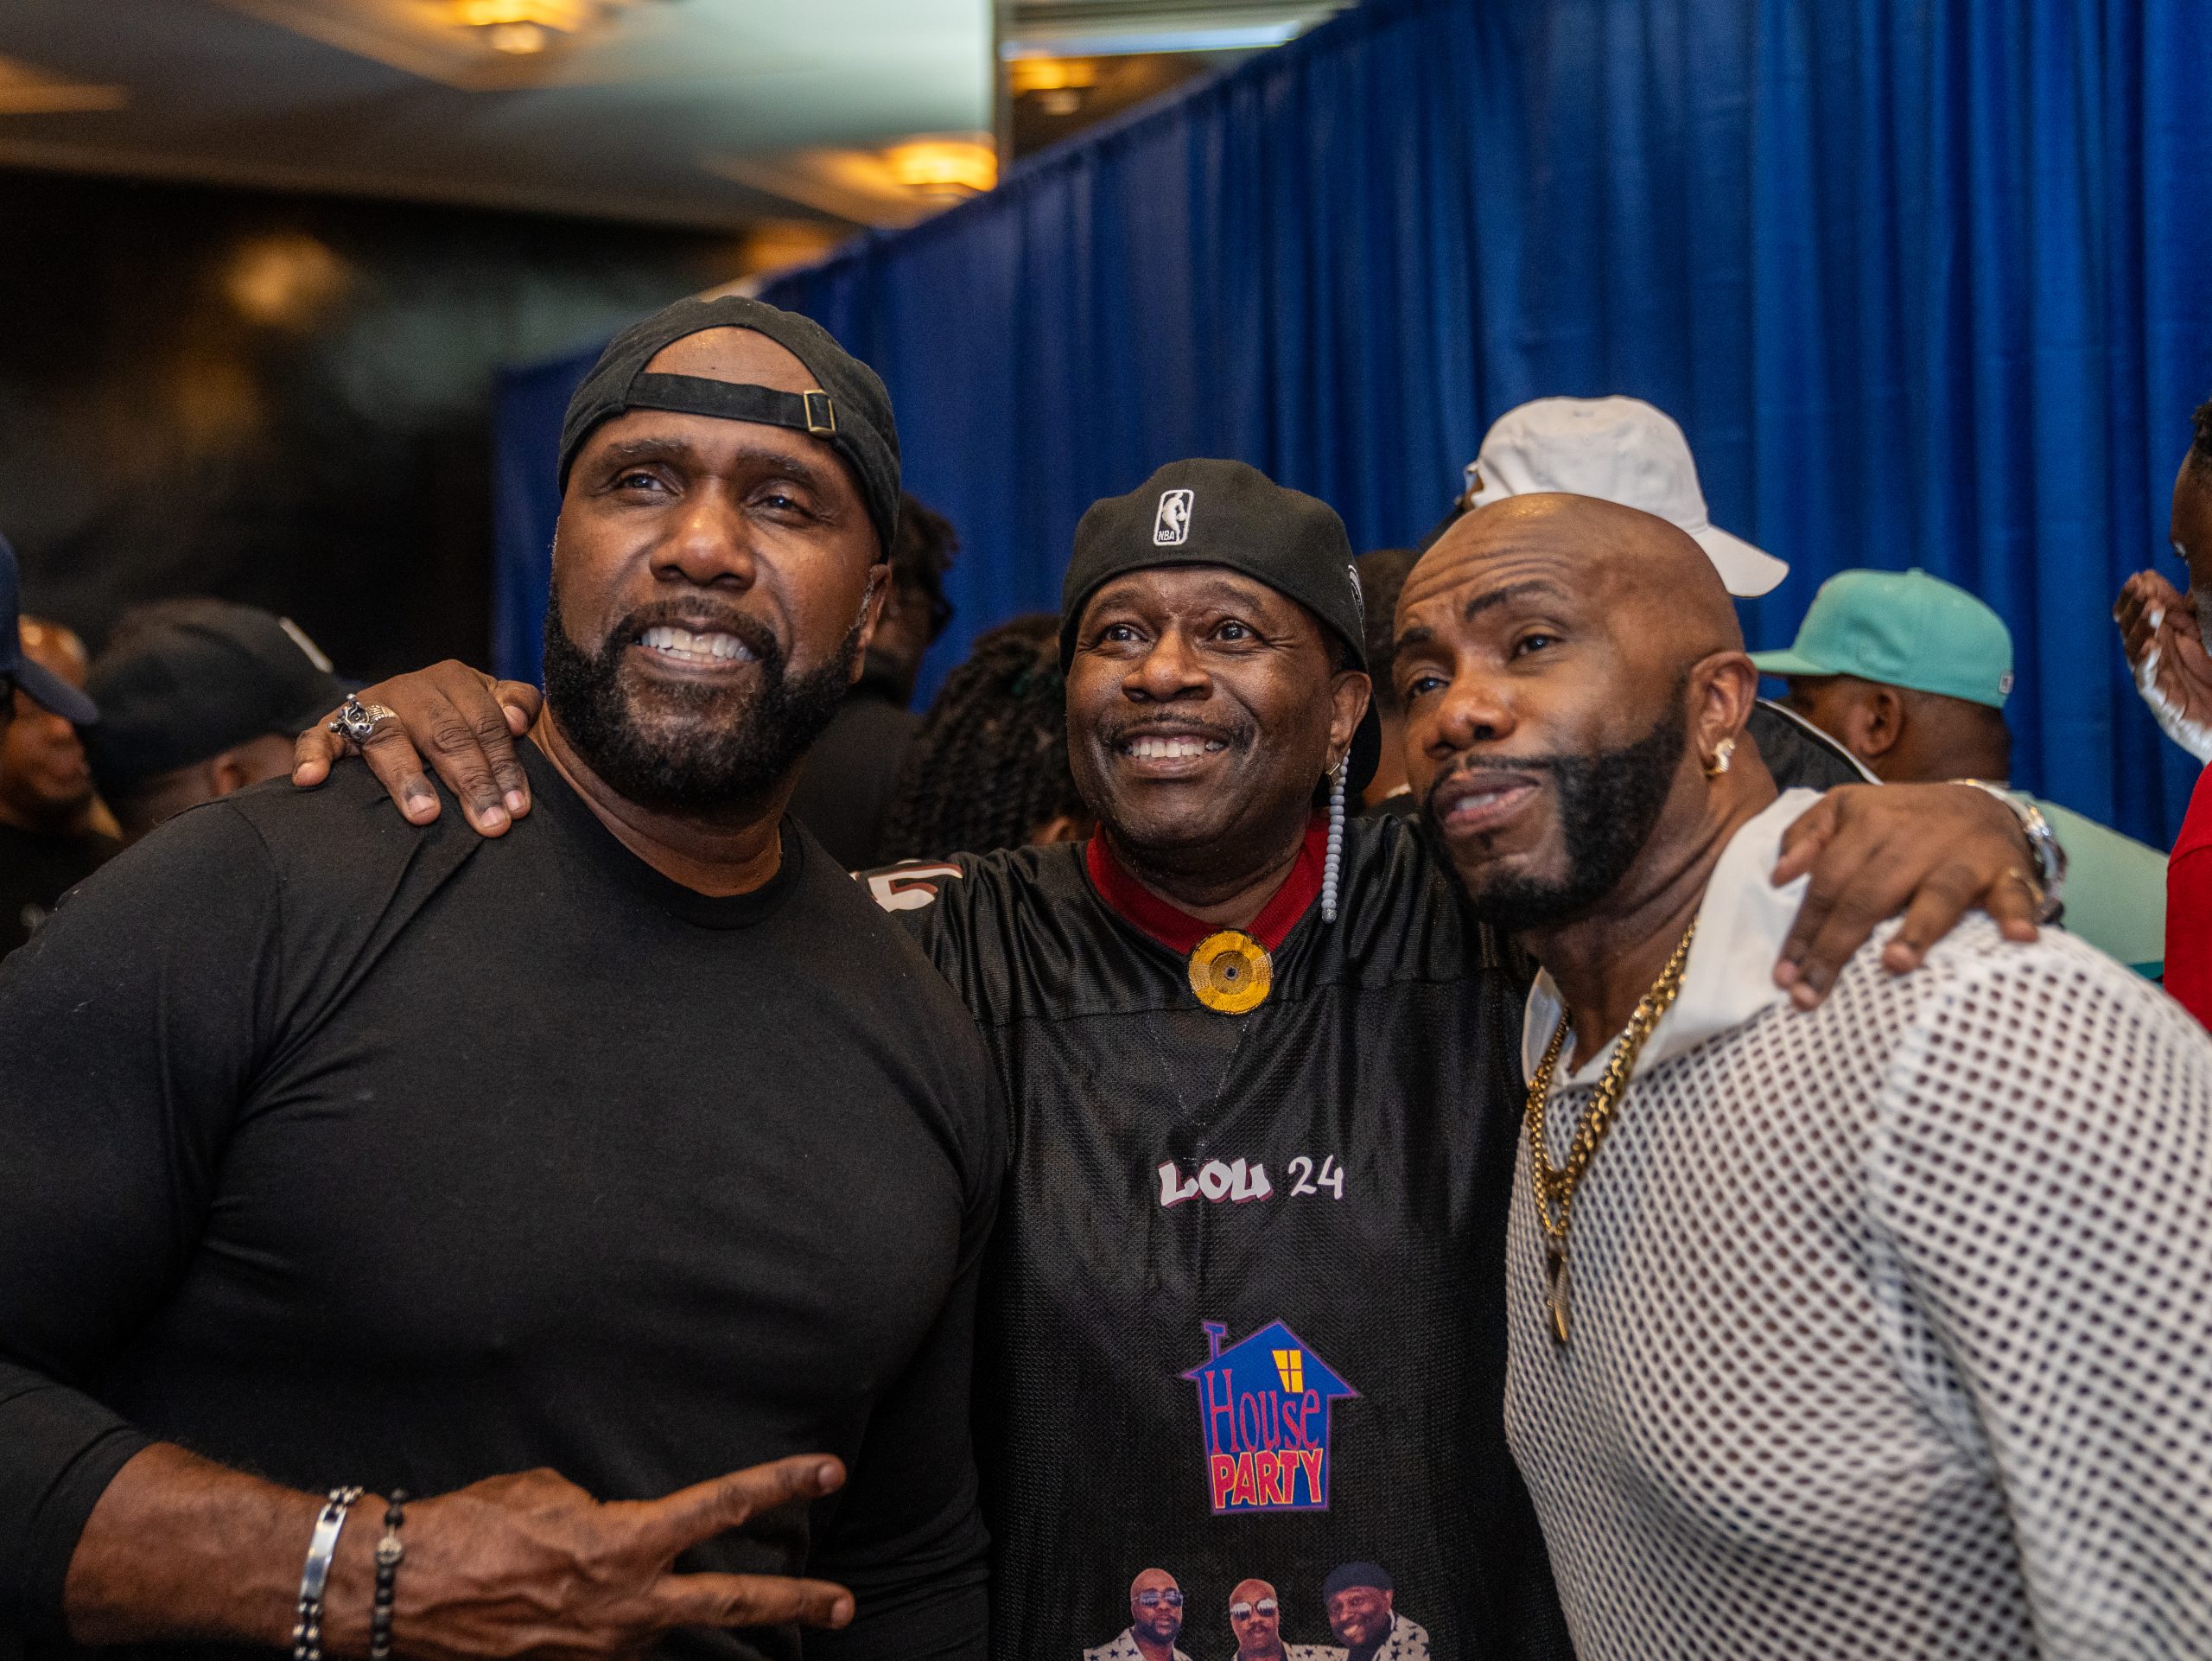 Full Force - Martell Cognac, The Black Promoters Collective, and Power 105.1 present DJ Cassidy's Pass The Mic LIVE at Radio City Music Hall in NYC